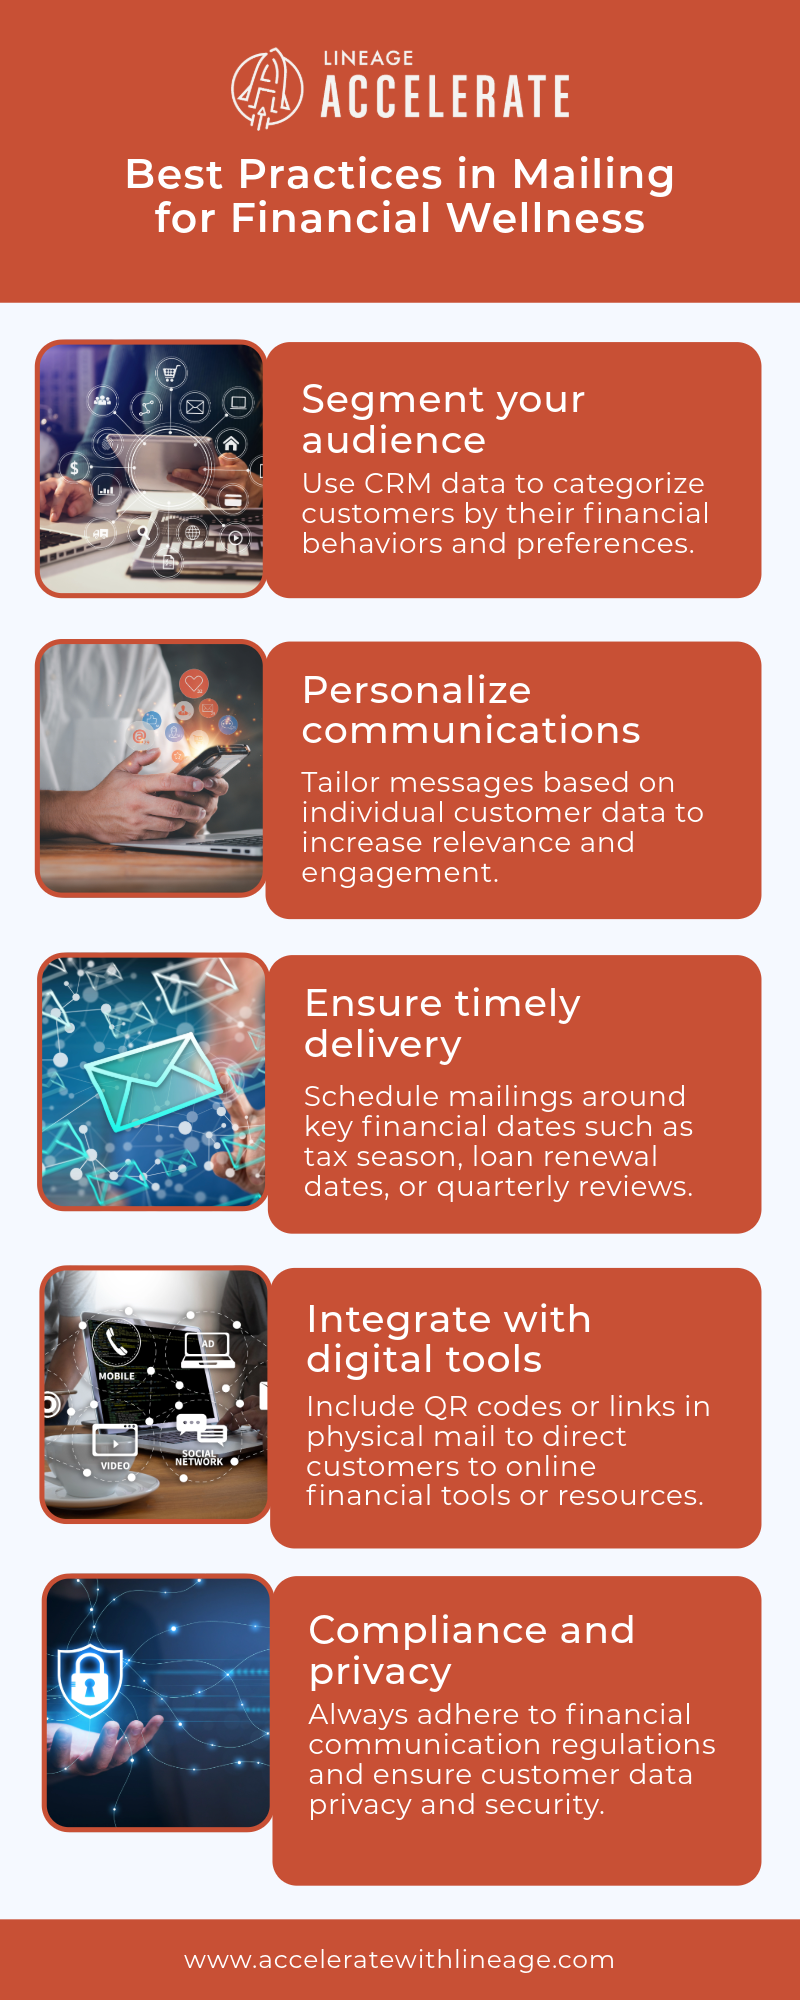 Best Practices in Utilizing Mailing Systems for Financial Wellness infographic